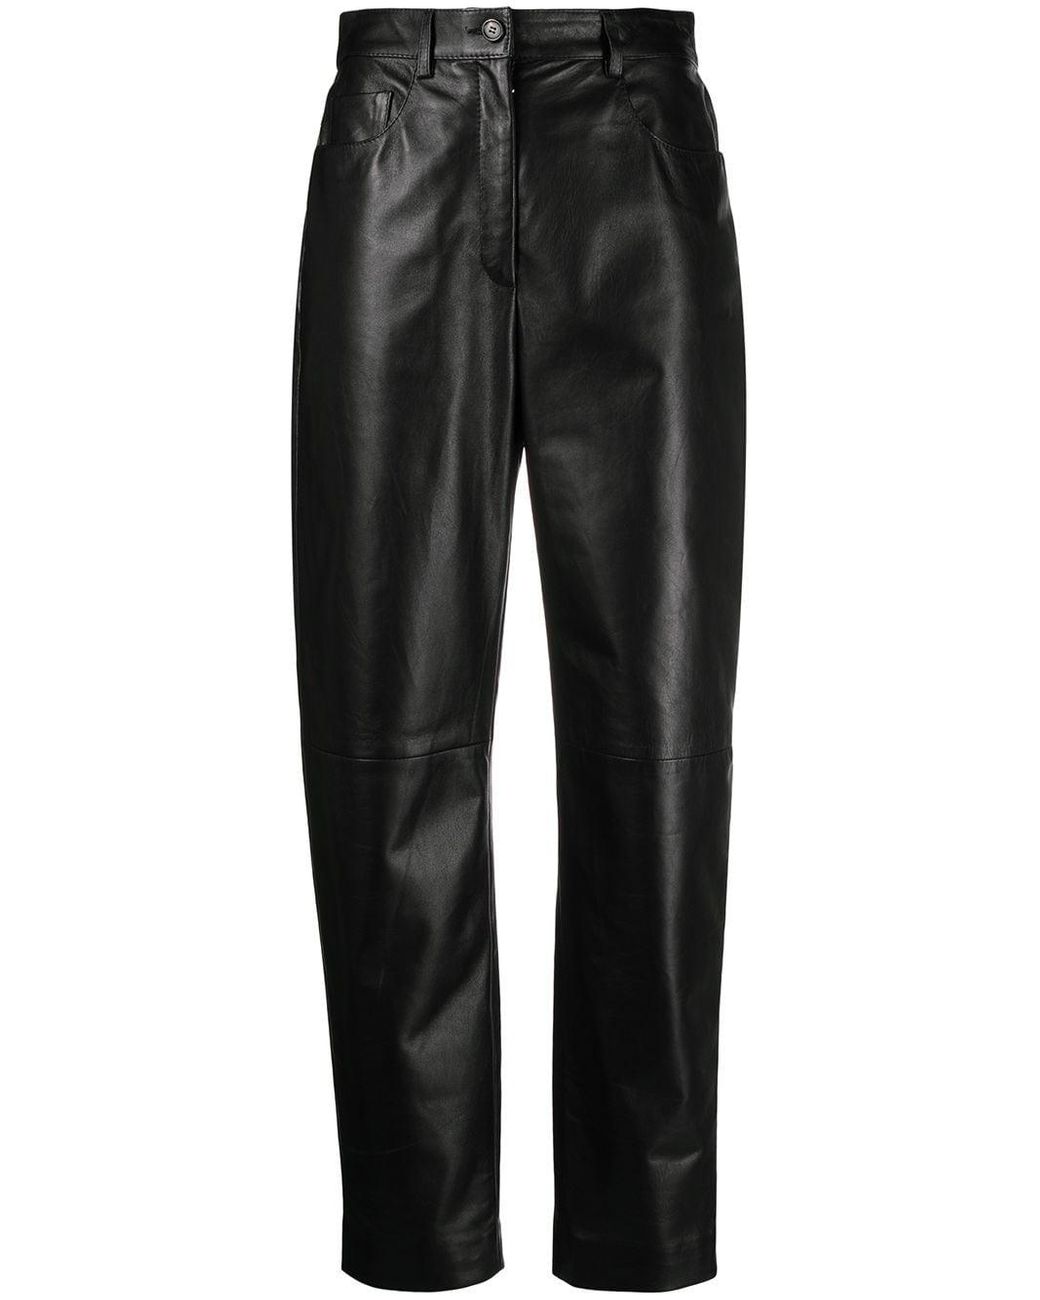 Dolce & Gabbana High-waisted Leather Trousers in Black - Lyst